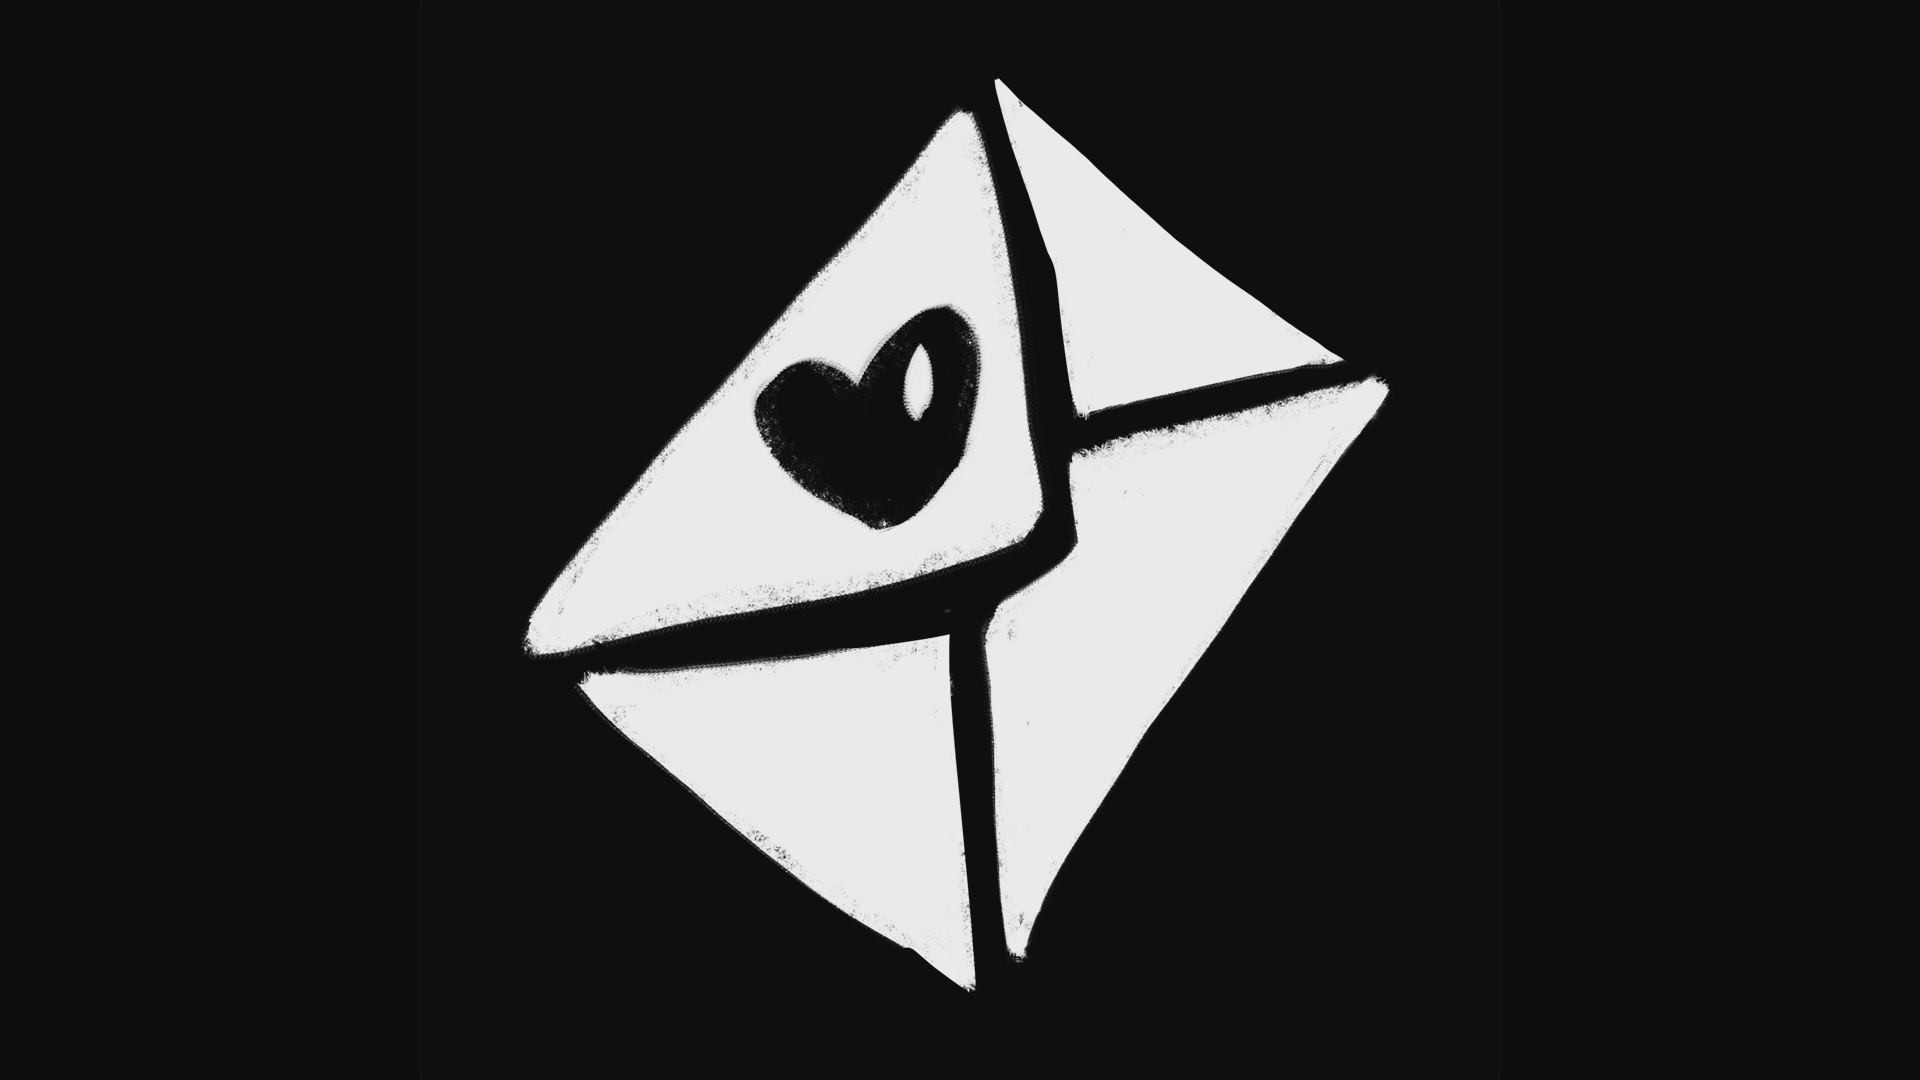 Icon for Love letters